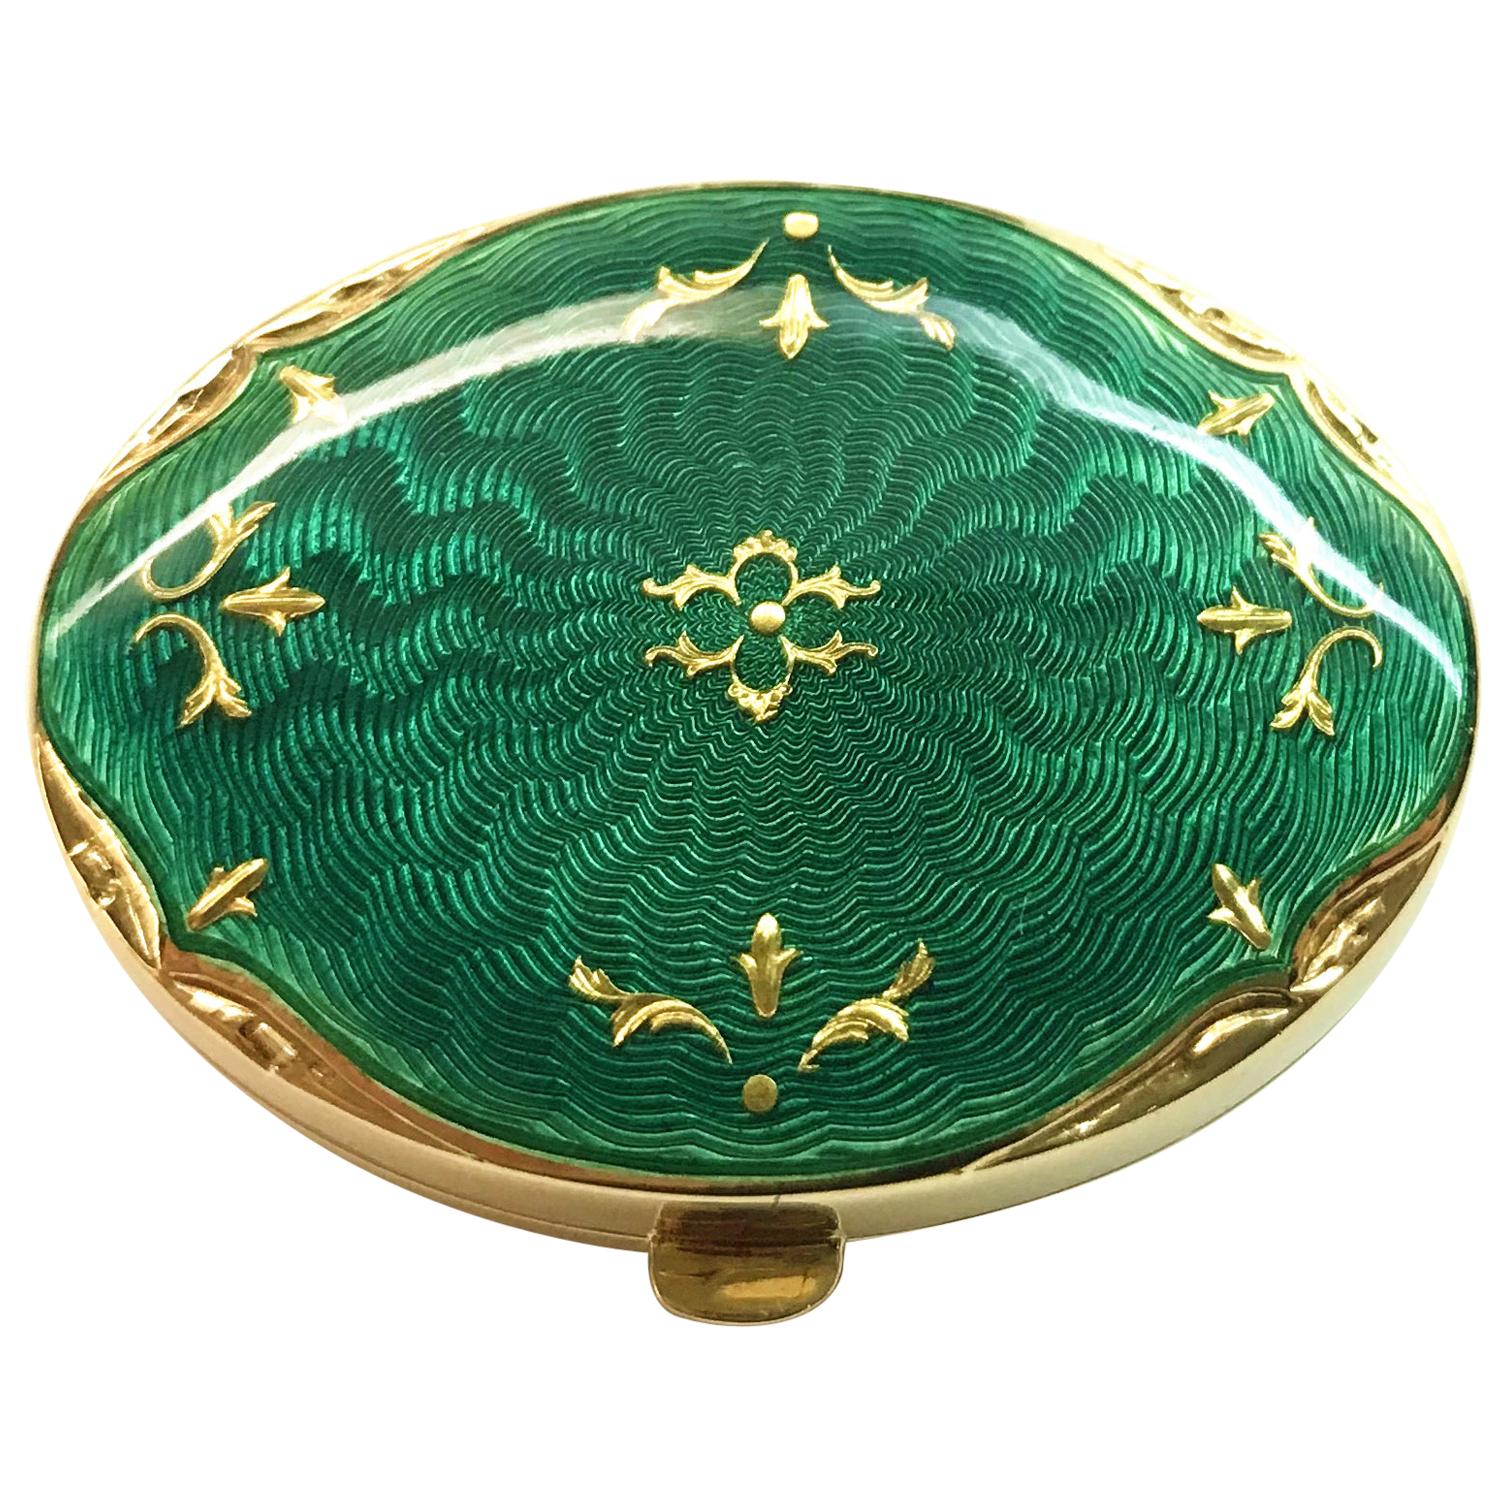 Fabergé Limited-Edition Yellow Gold Green Enamel Pillbox